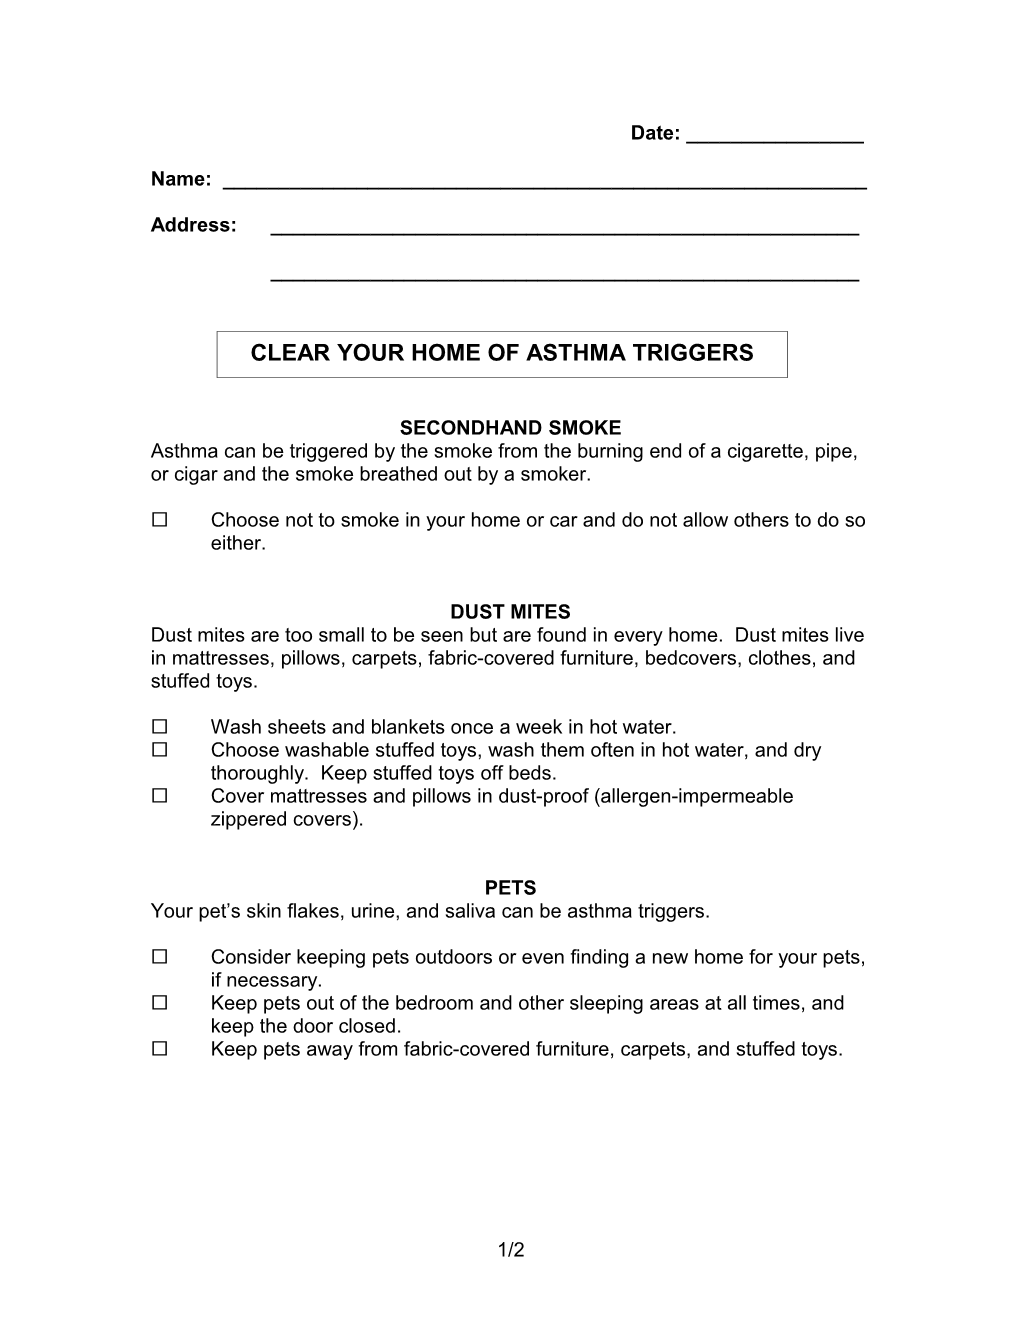 Clear Your Home of Asthma Triggers